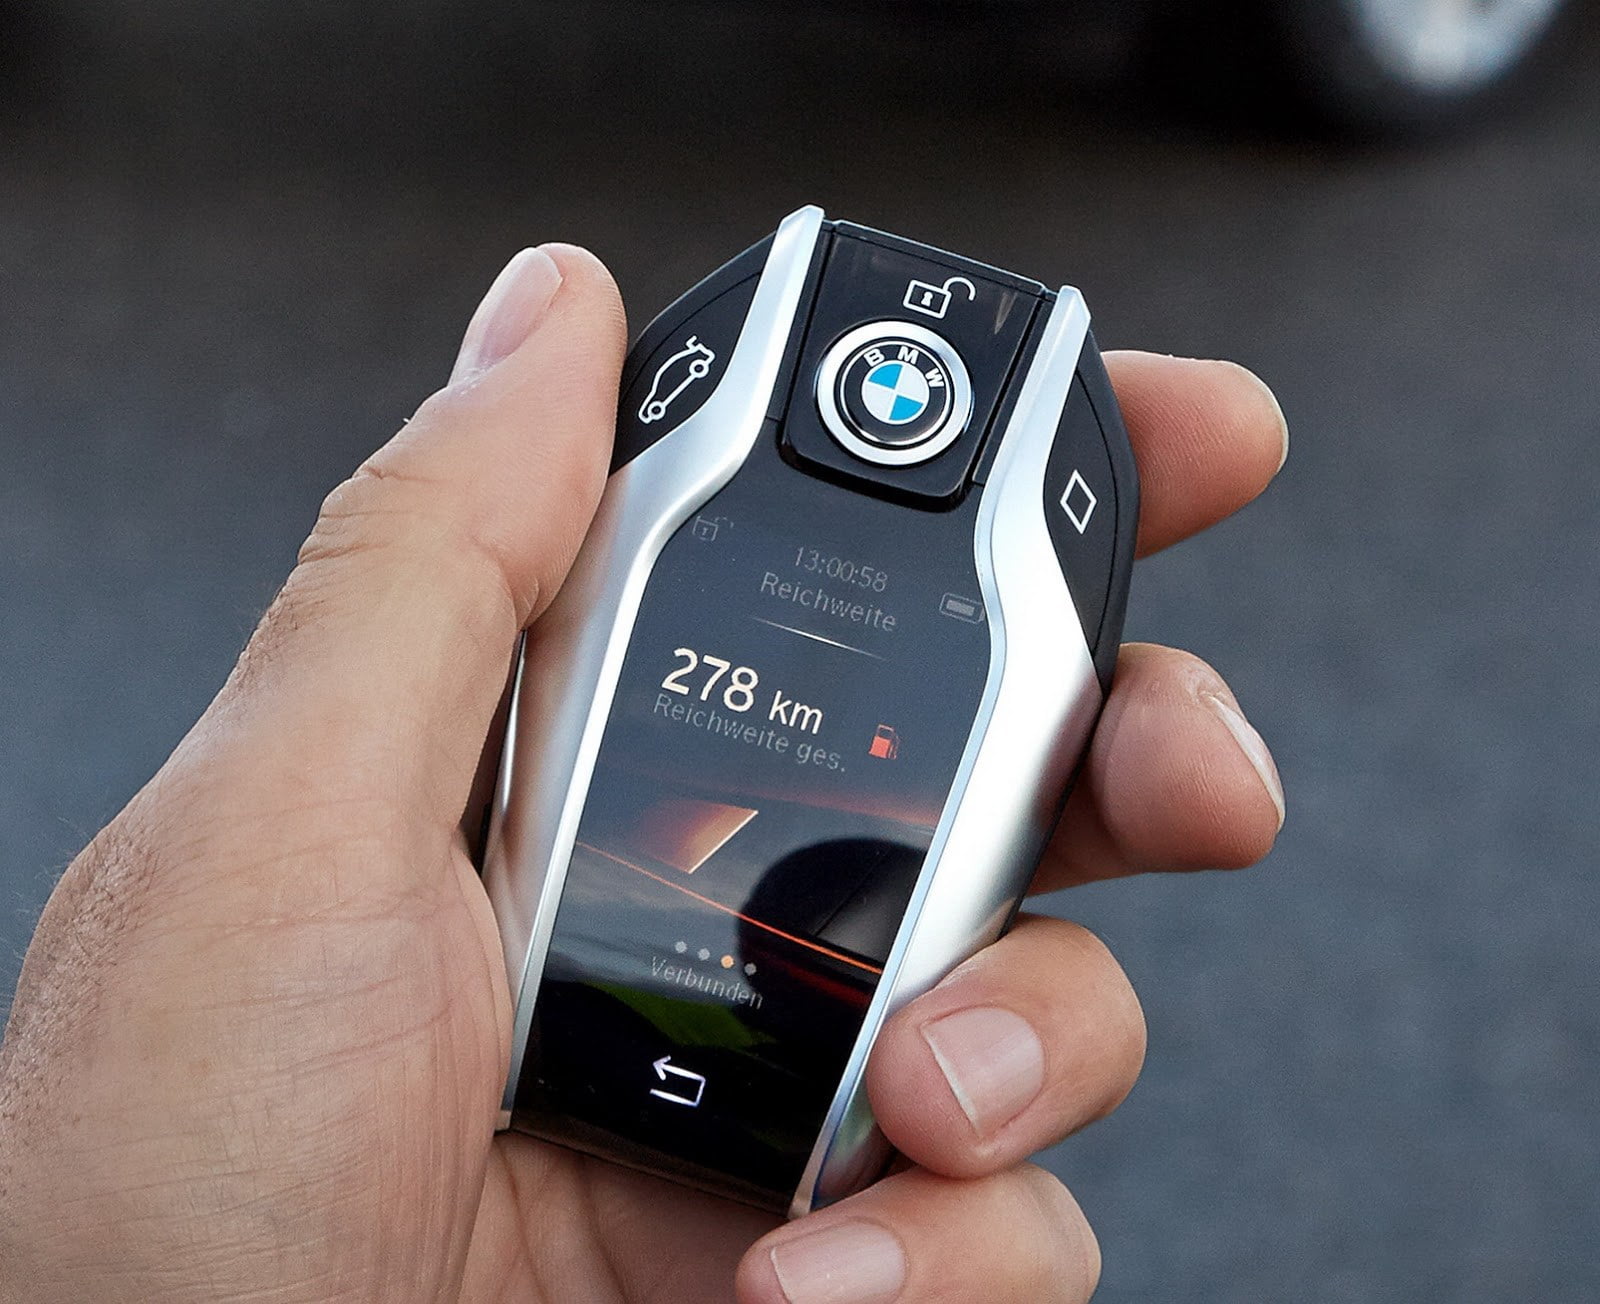 Best BMW car key replacement services in Orlando FL ...